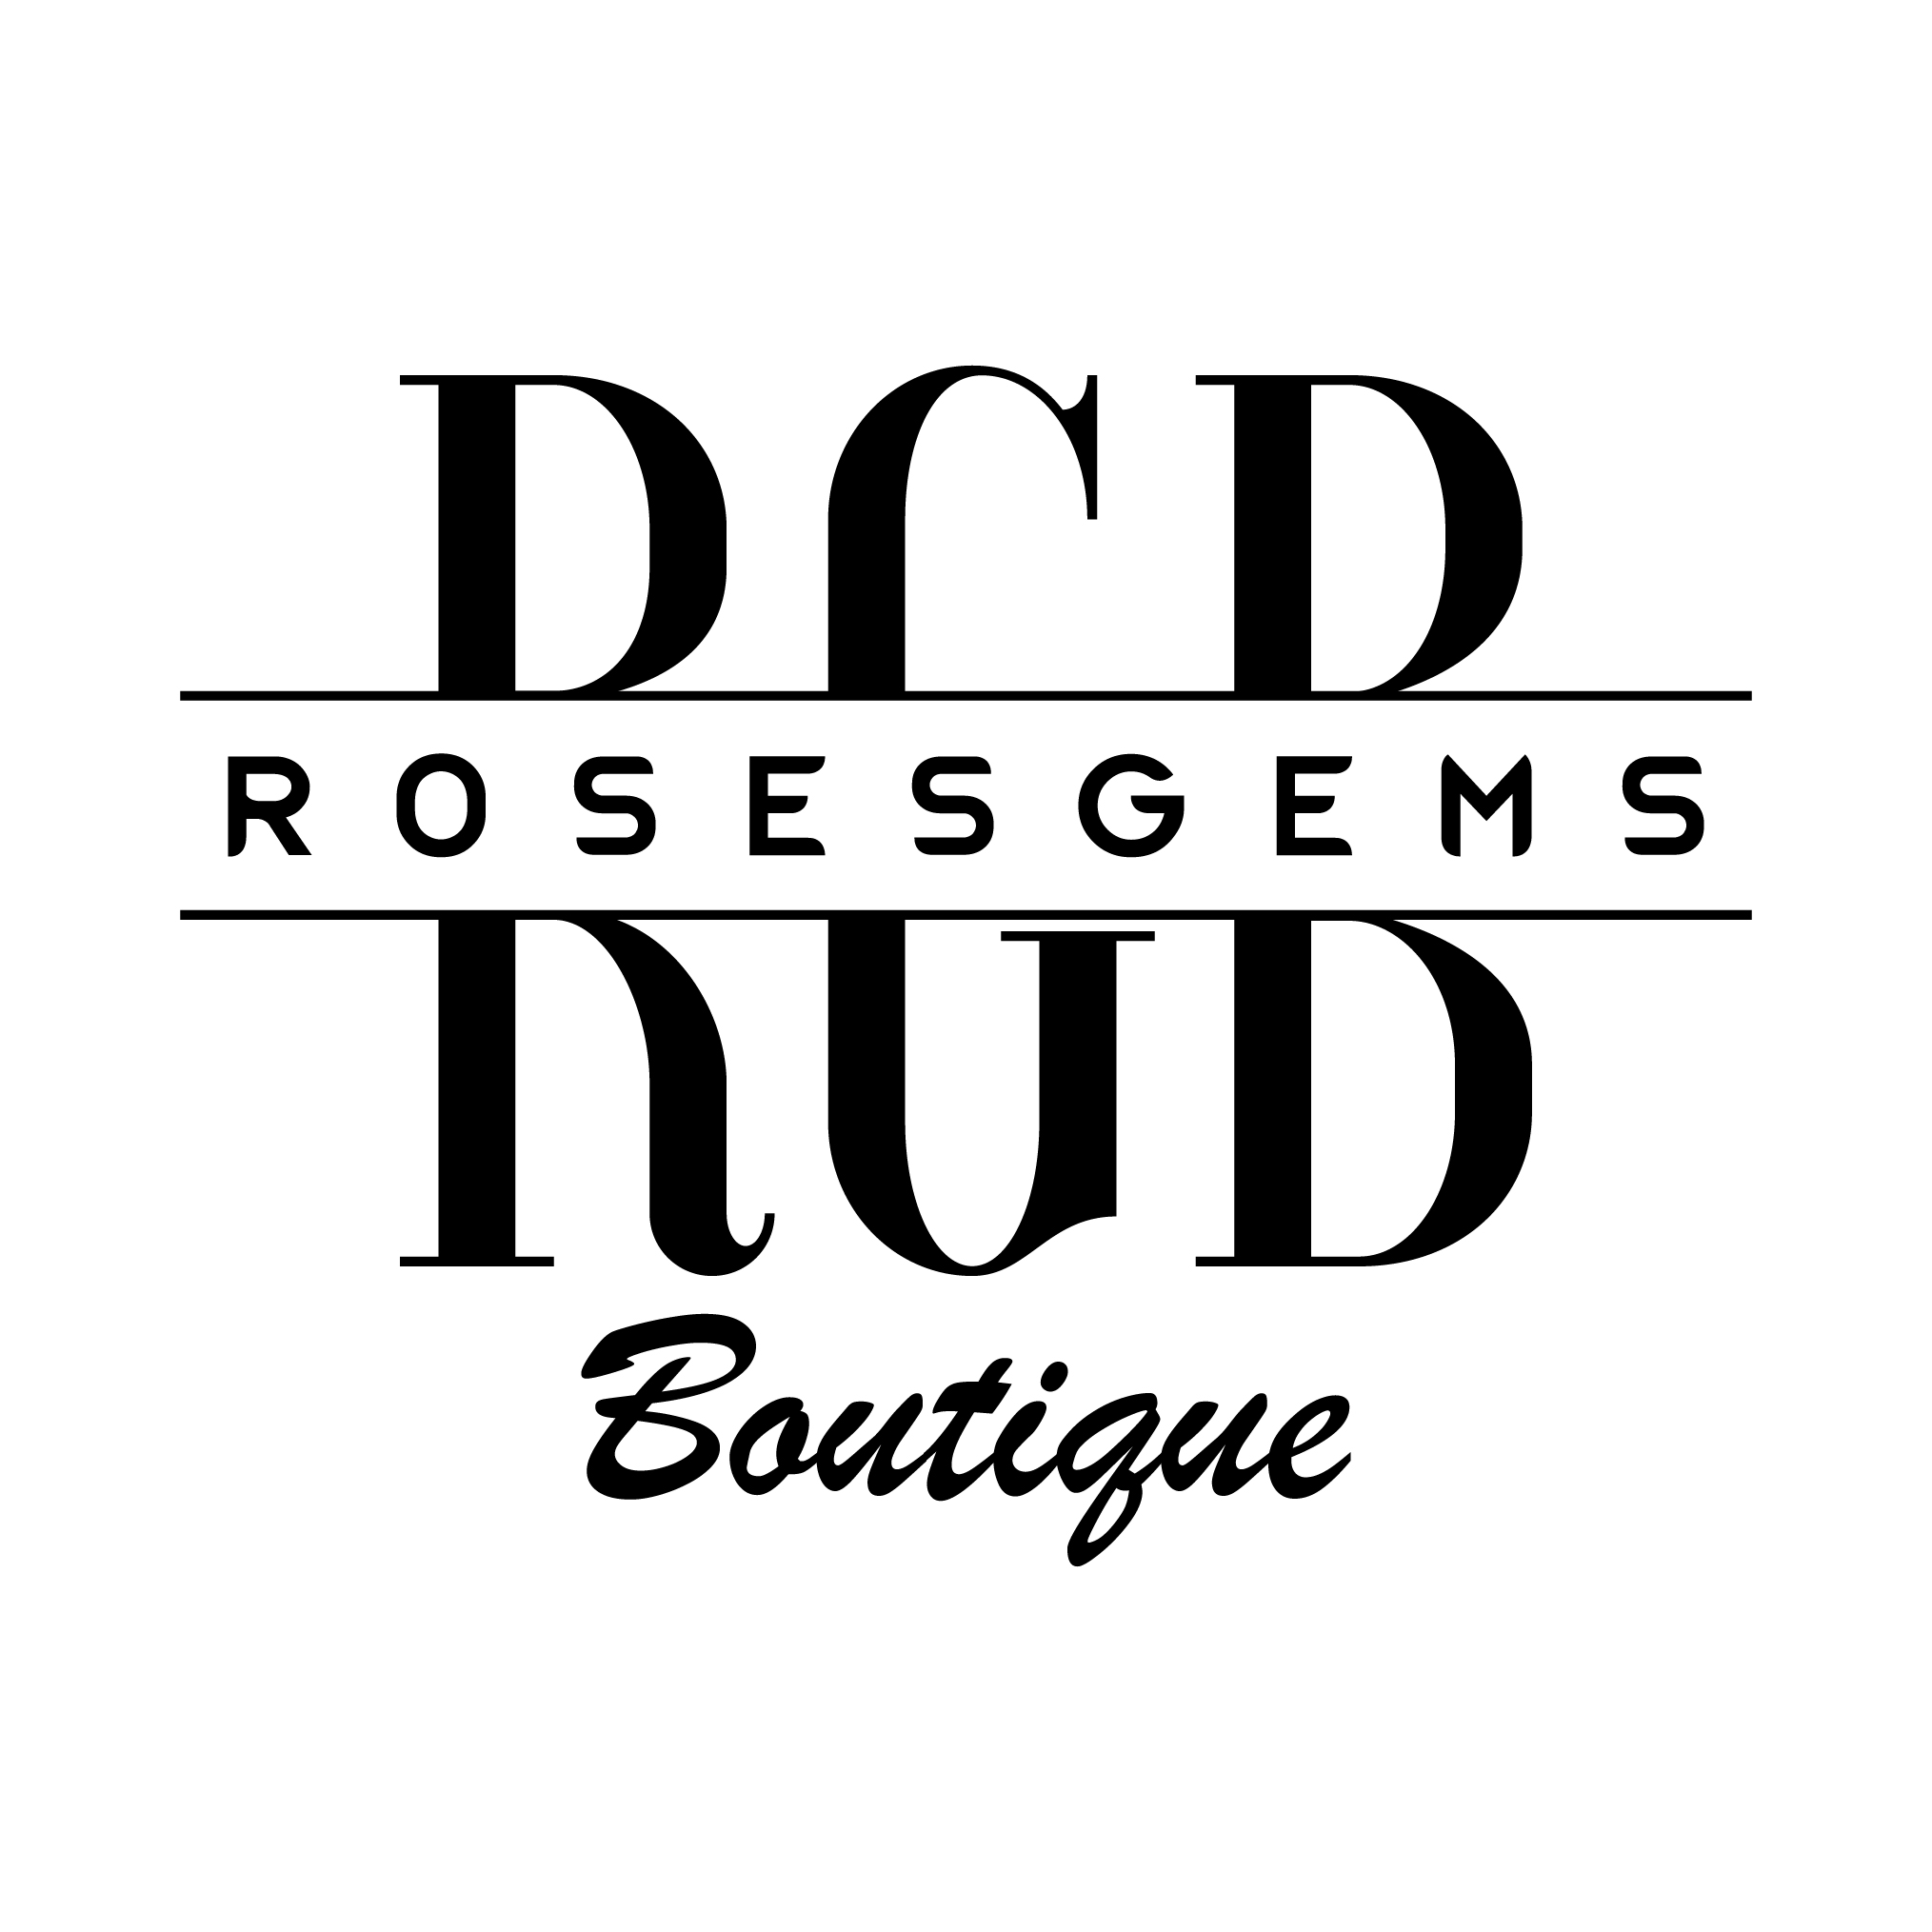 The logo or business face of "Rosesgems Boutique LLC"